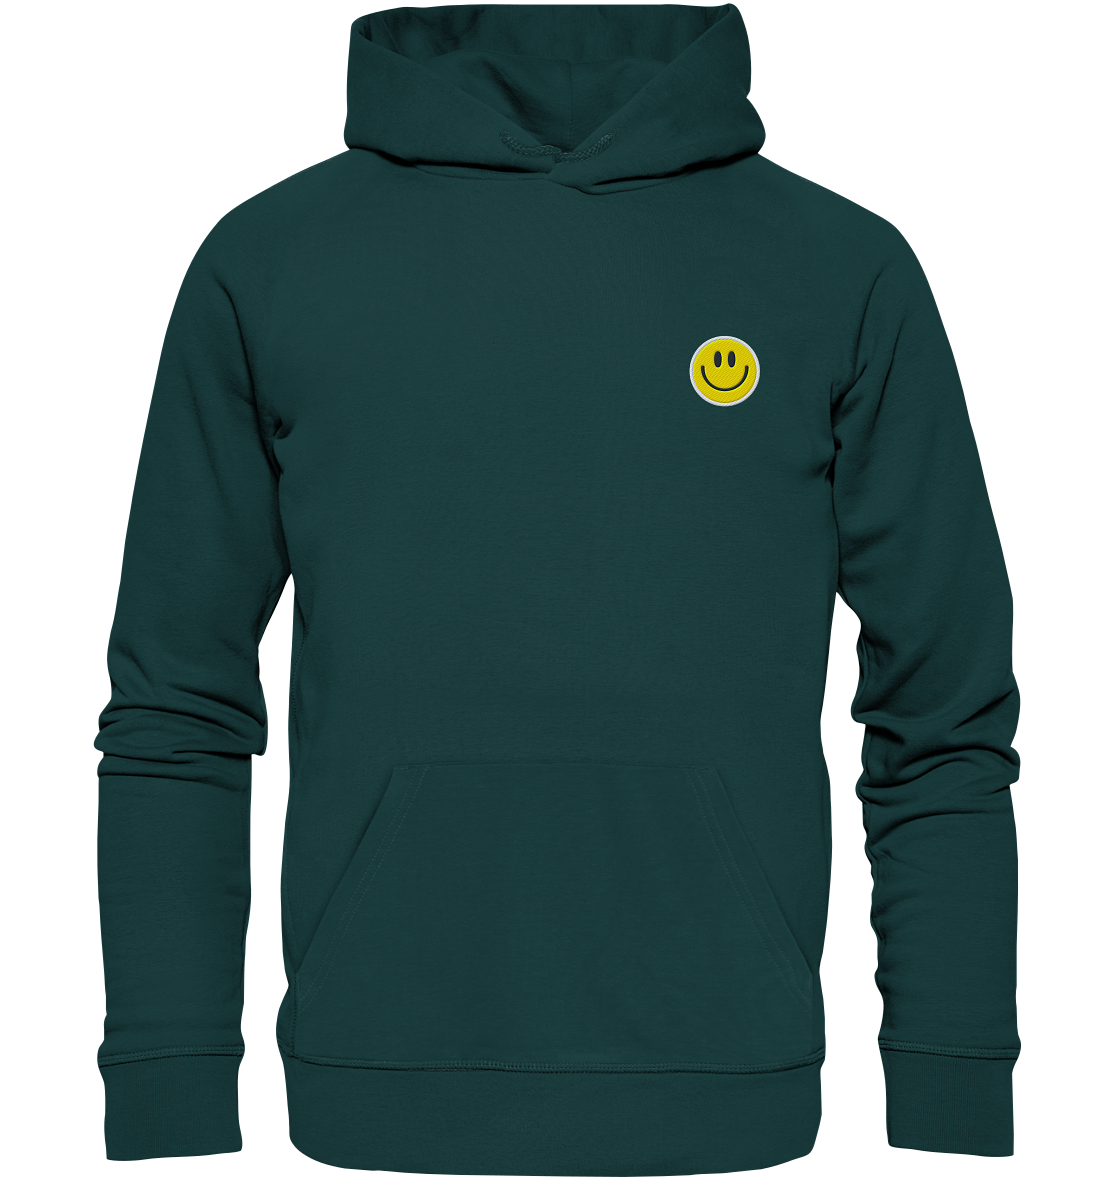 Smiley | Premium Organic Hoodie (Embroidered)